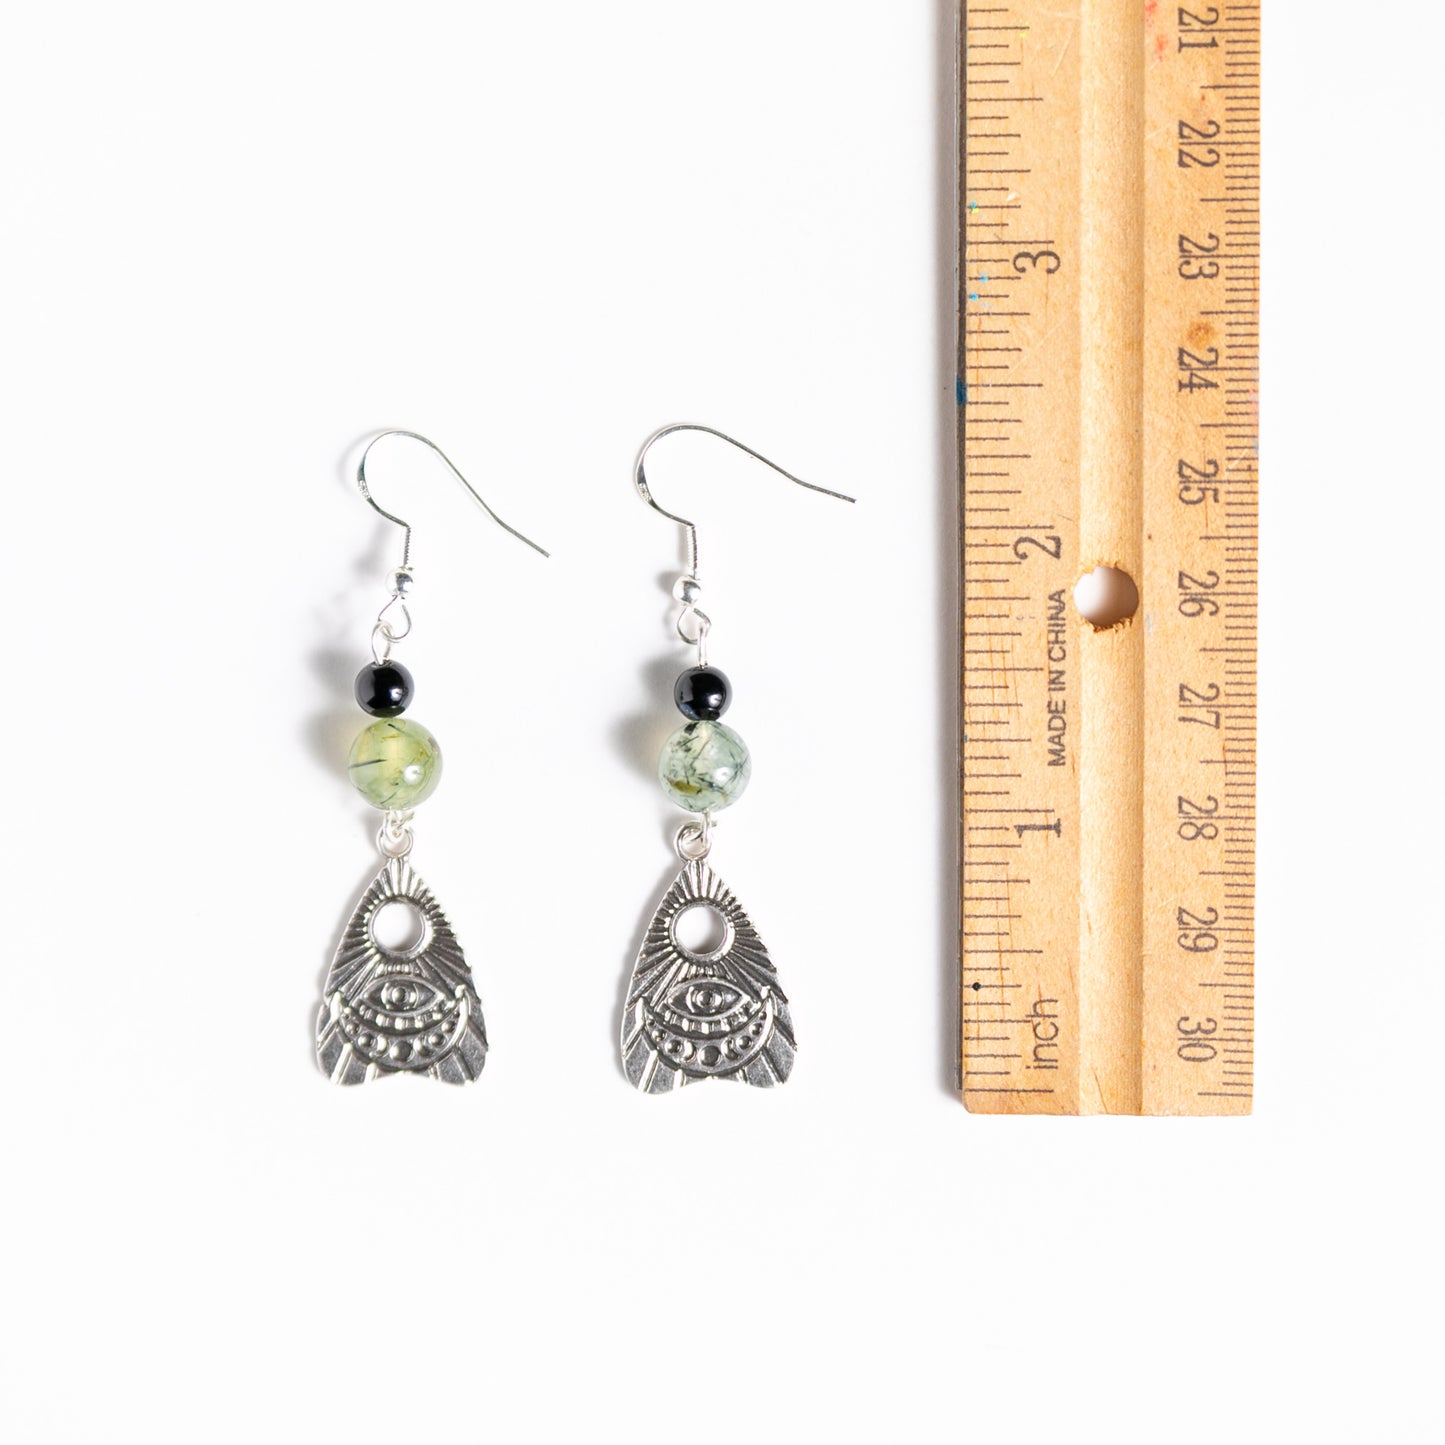 Looking Glass Planchette Earrings with Prehnite Stones